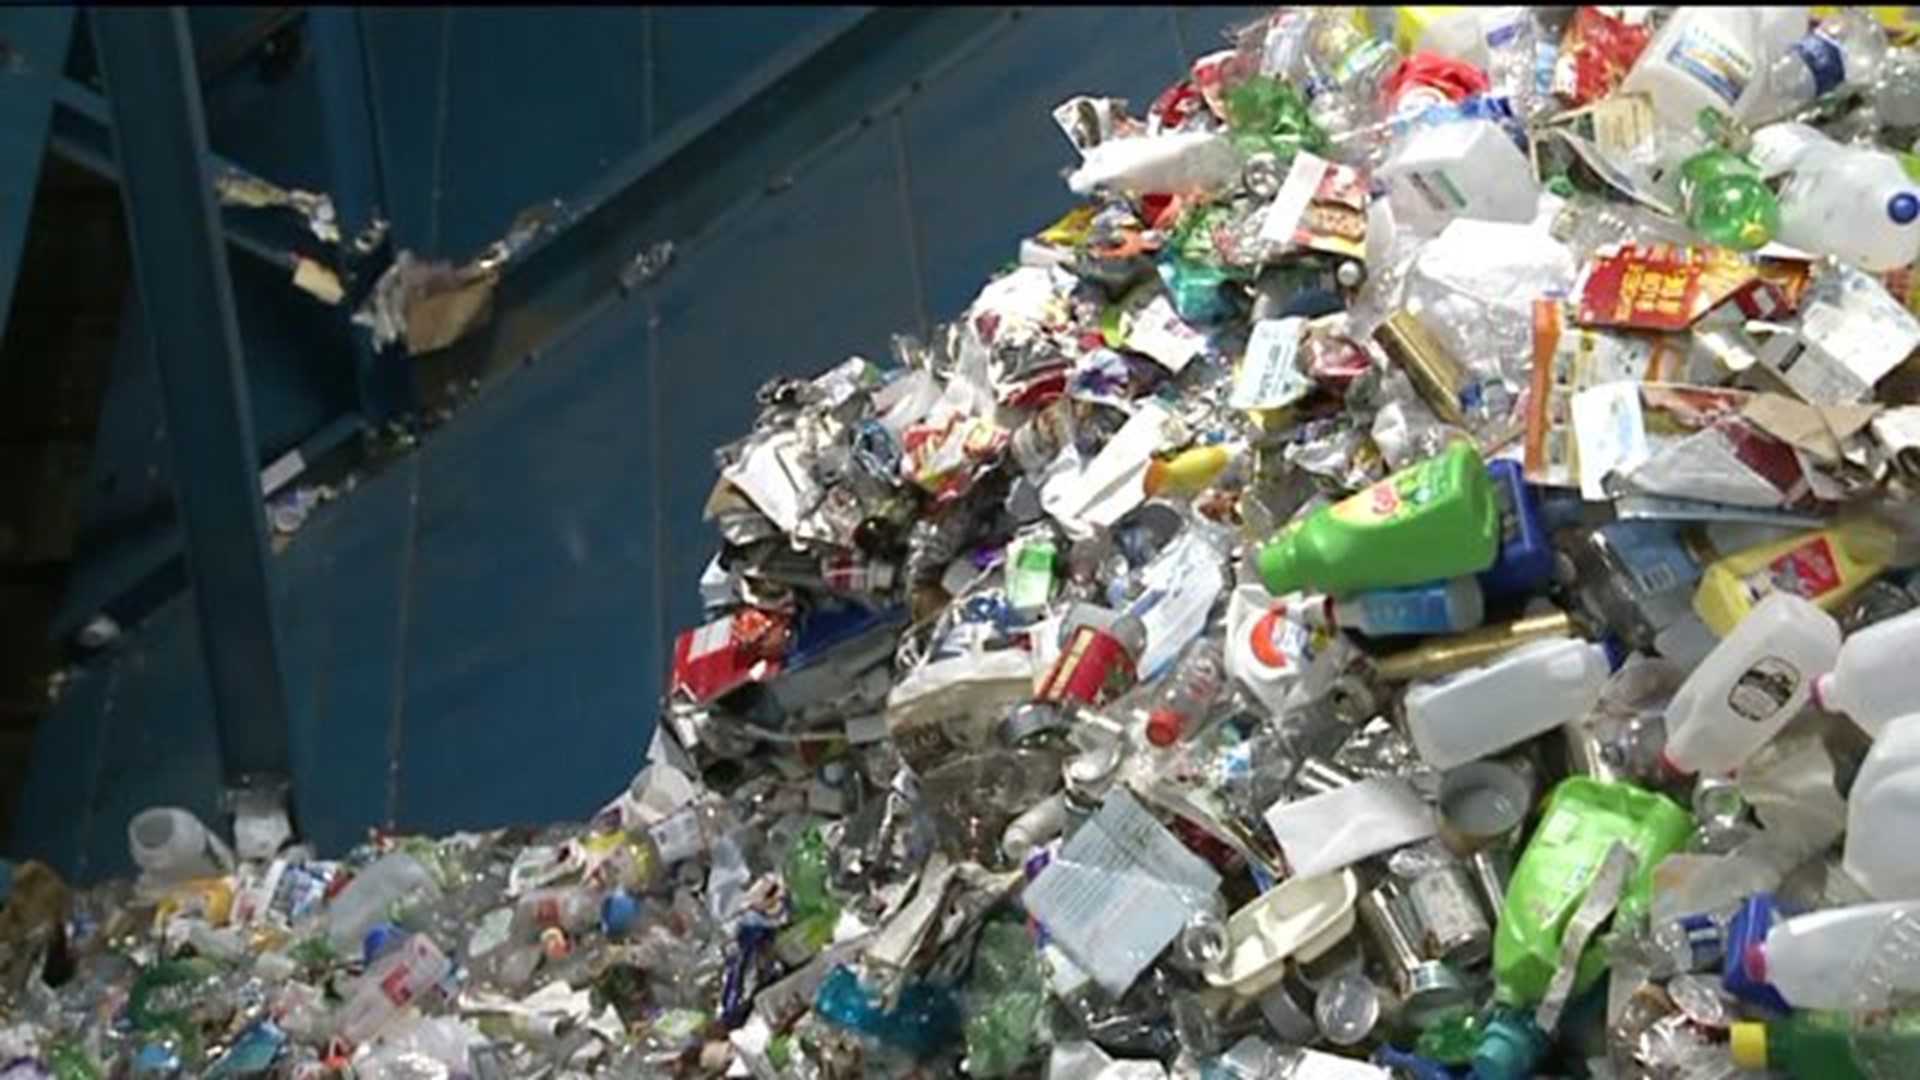 Power To Save: One For All Recycling Program | wnep.com